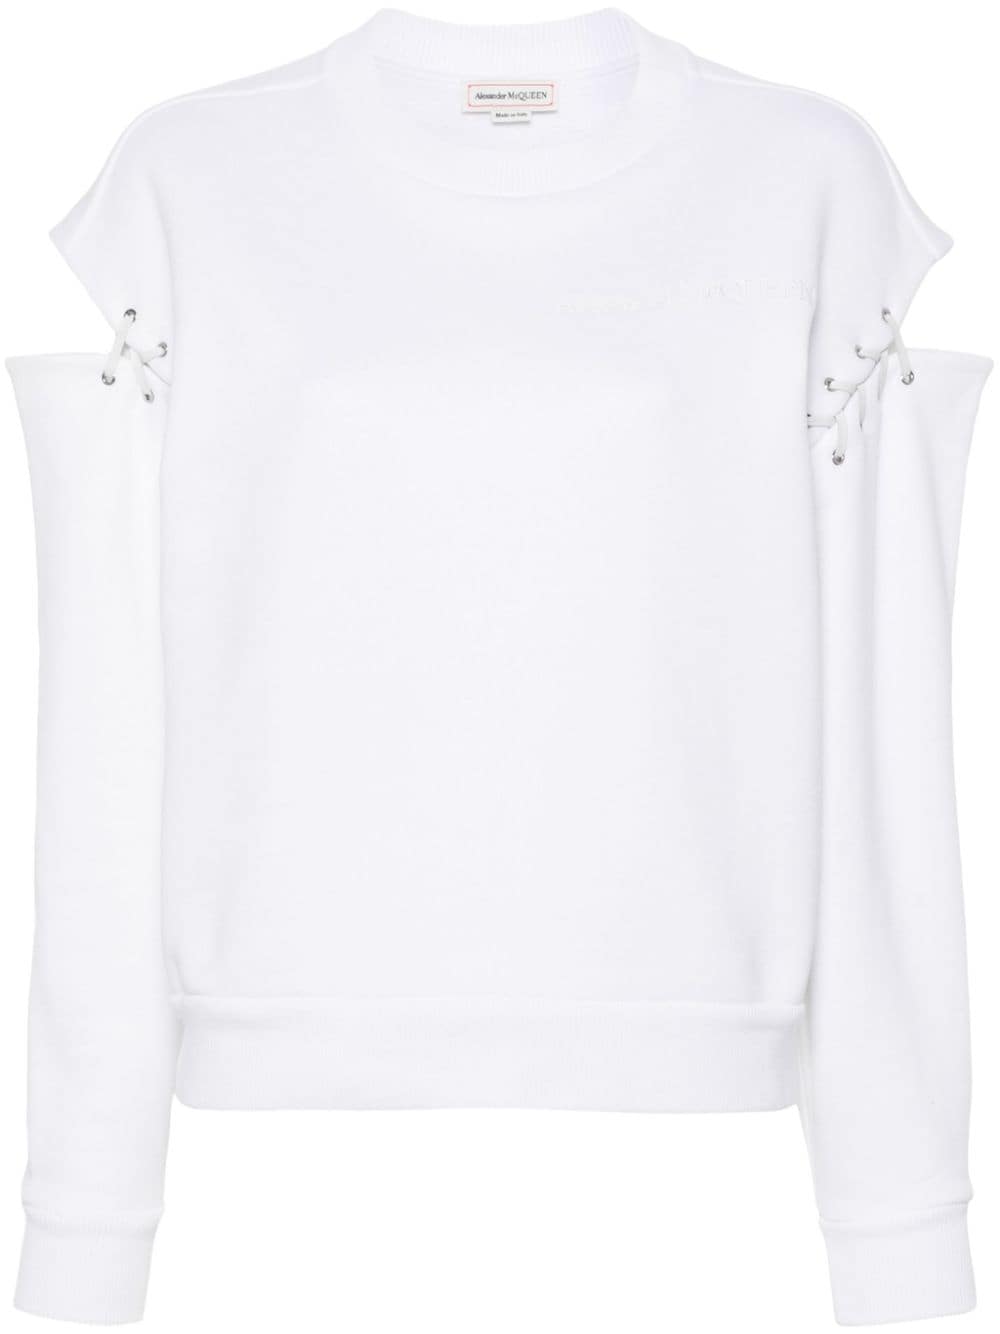 Image 1 of Alexander McQueen embroidered logo cut-out sweater